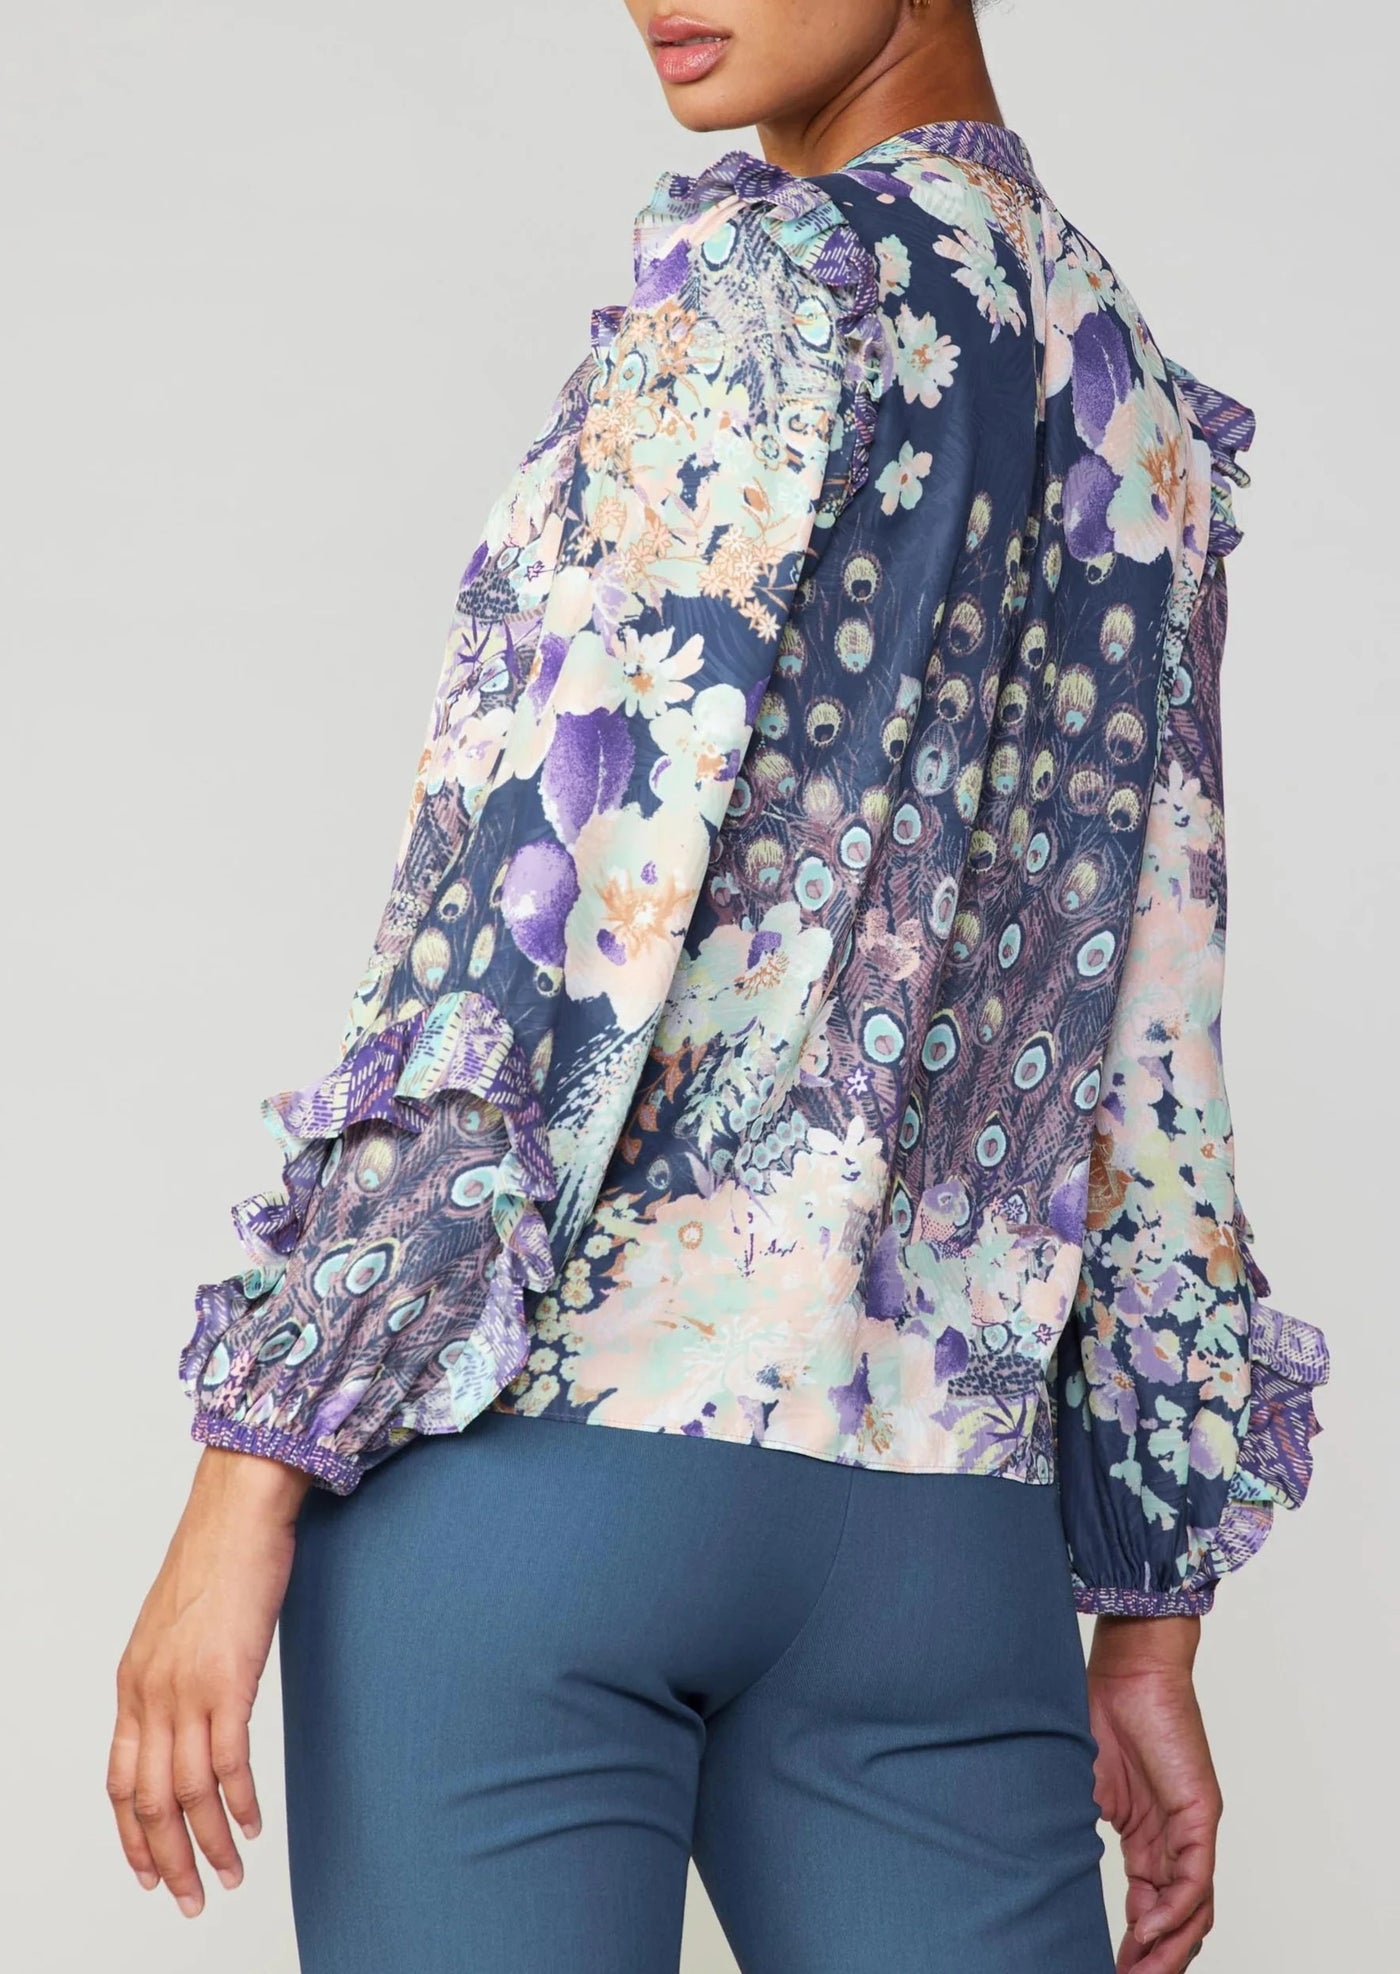 The Pink Door Relaxed Fit Peacock Floral Blouse - Navy